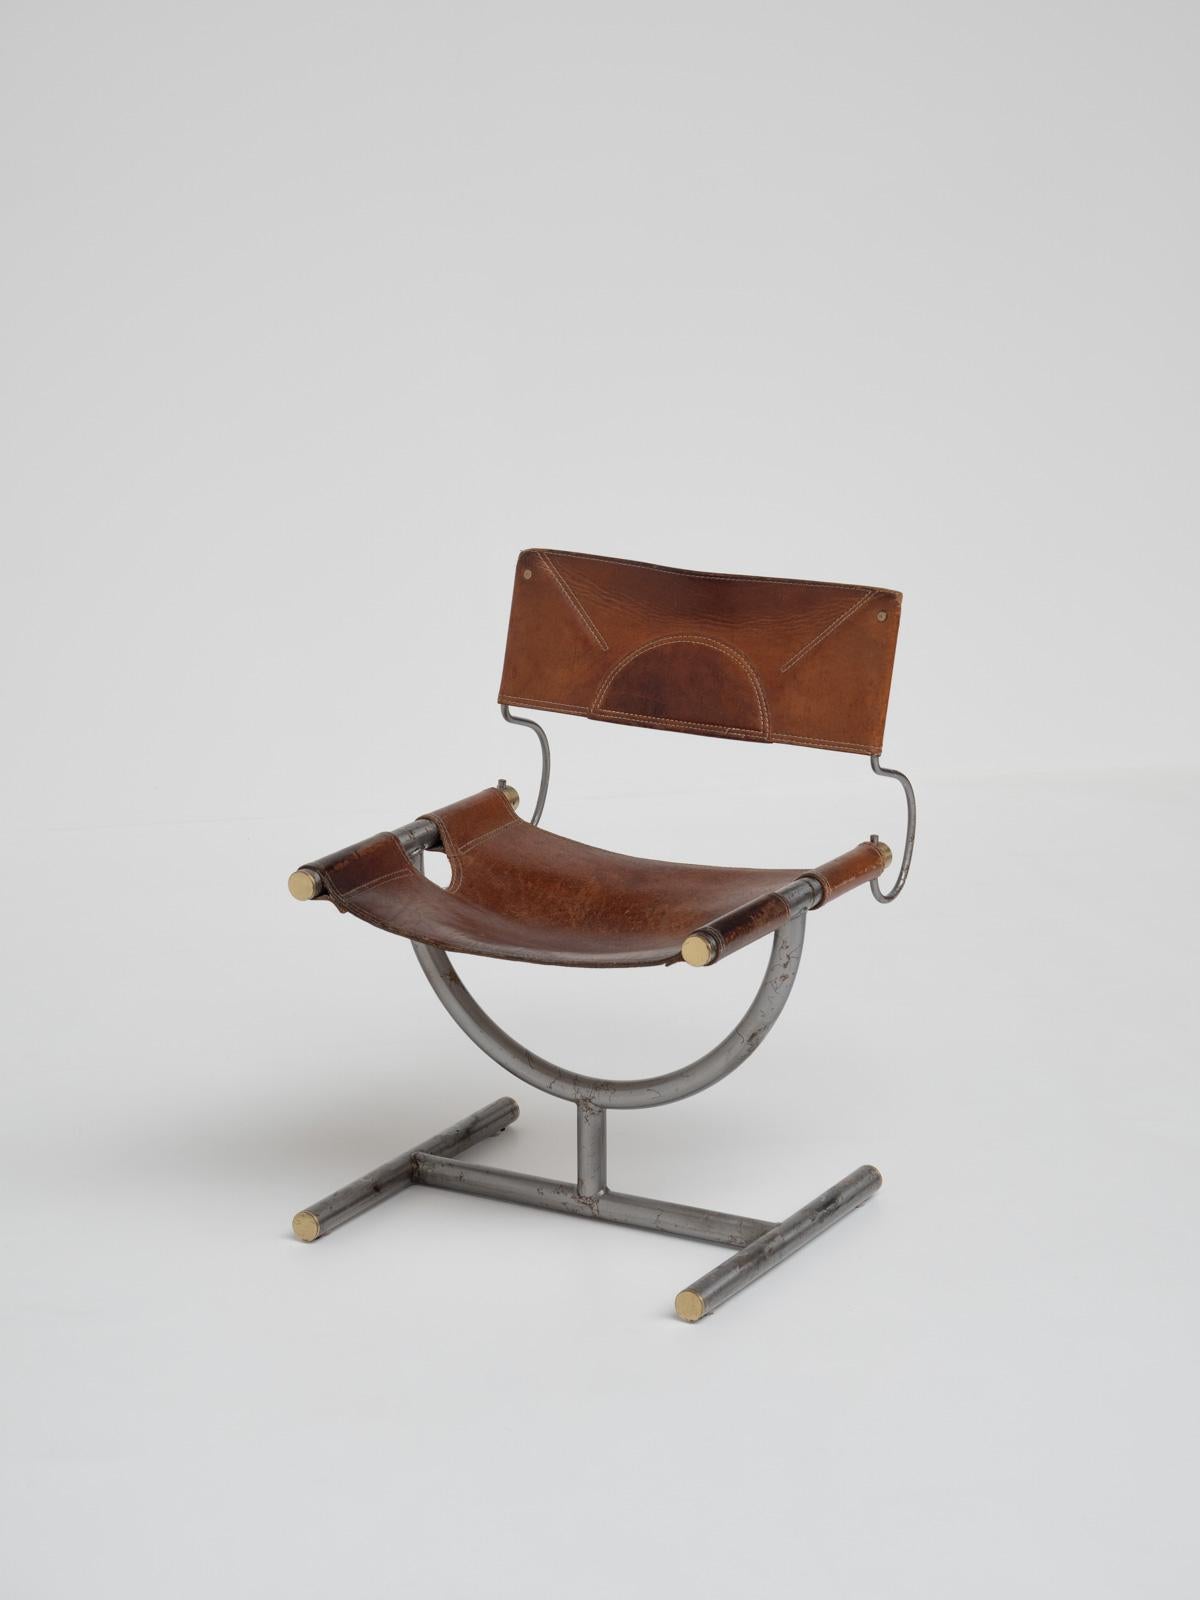 Designed for the Benetton office by the iconic Italian architects Afra & Tobia Scarpa in 1985. Crafted from brass, leather, and steel, it epitomizes the elegance and sophistication of Italian design. 

The chair features its original cognac leather